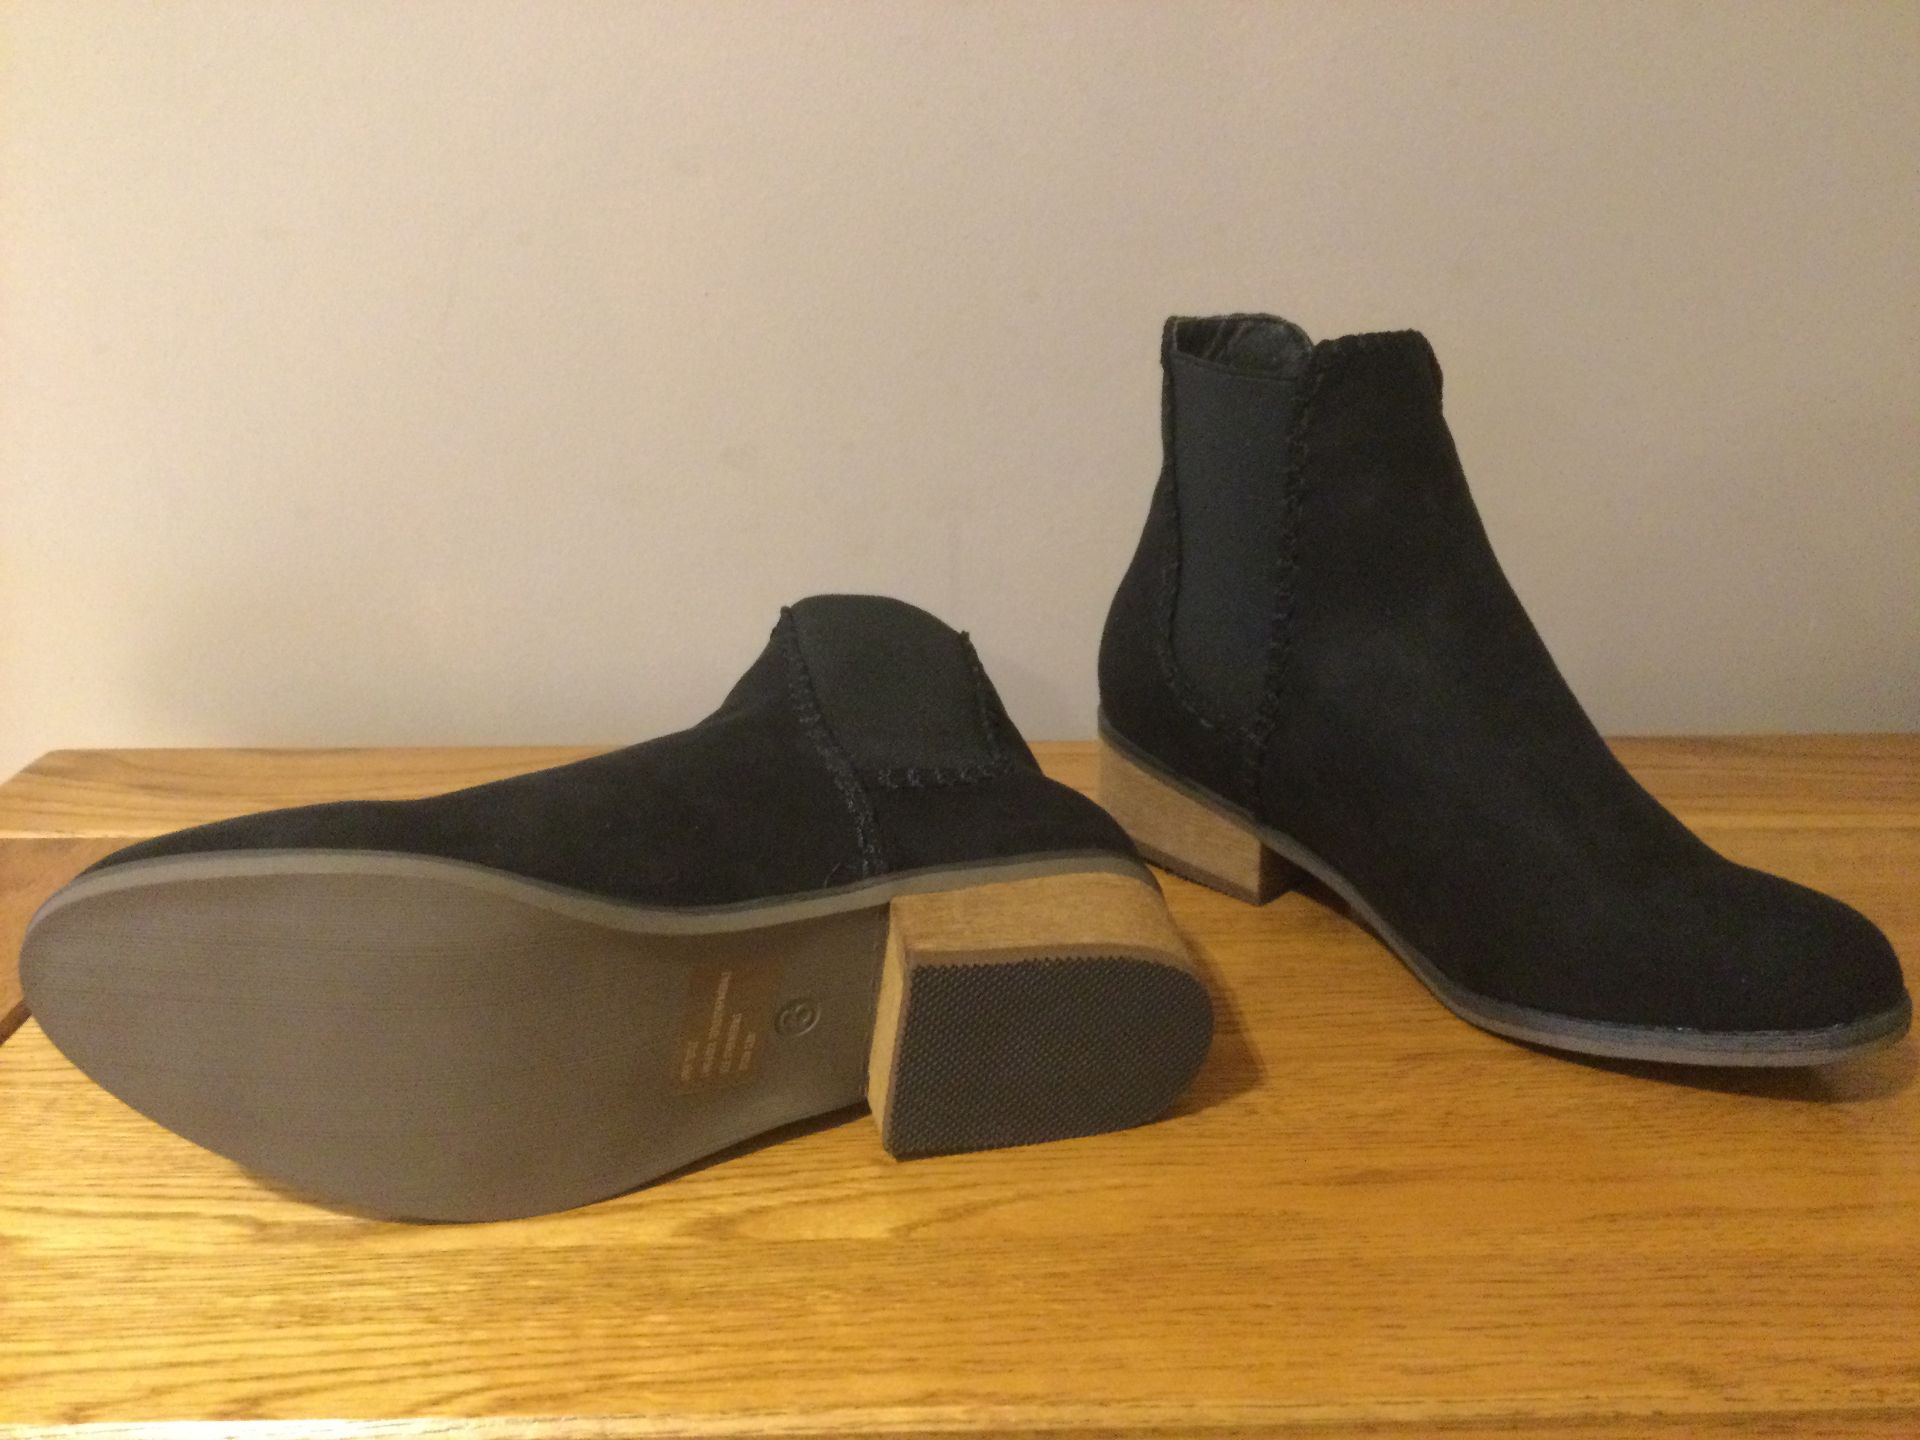 Dolcis “Pasha” Low Heel Ankle Boots, Size 5, Black - New RRP £45.99 - Image 2 of 6